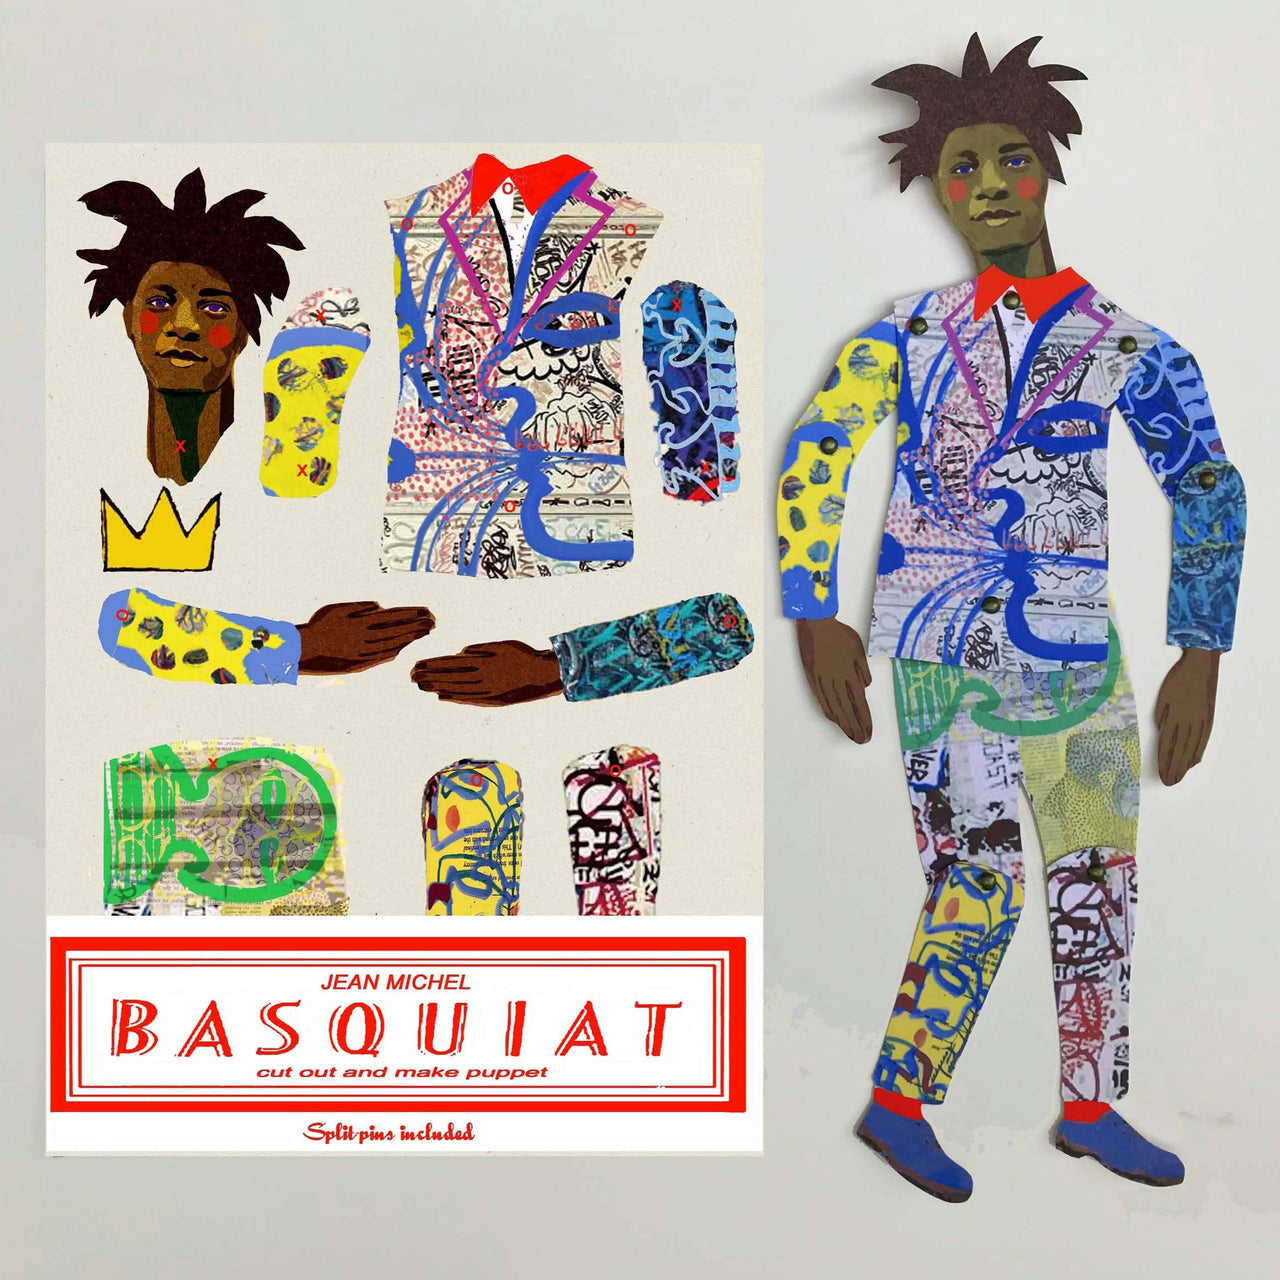 Basquiat Cut Out and Make Puppet